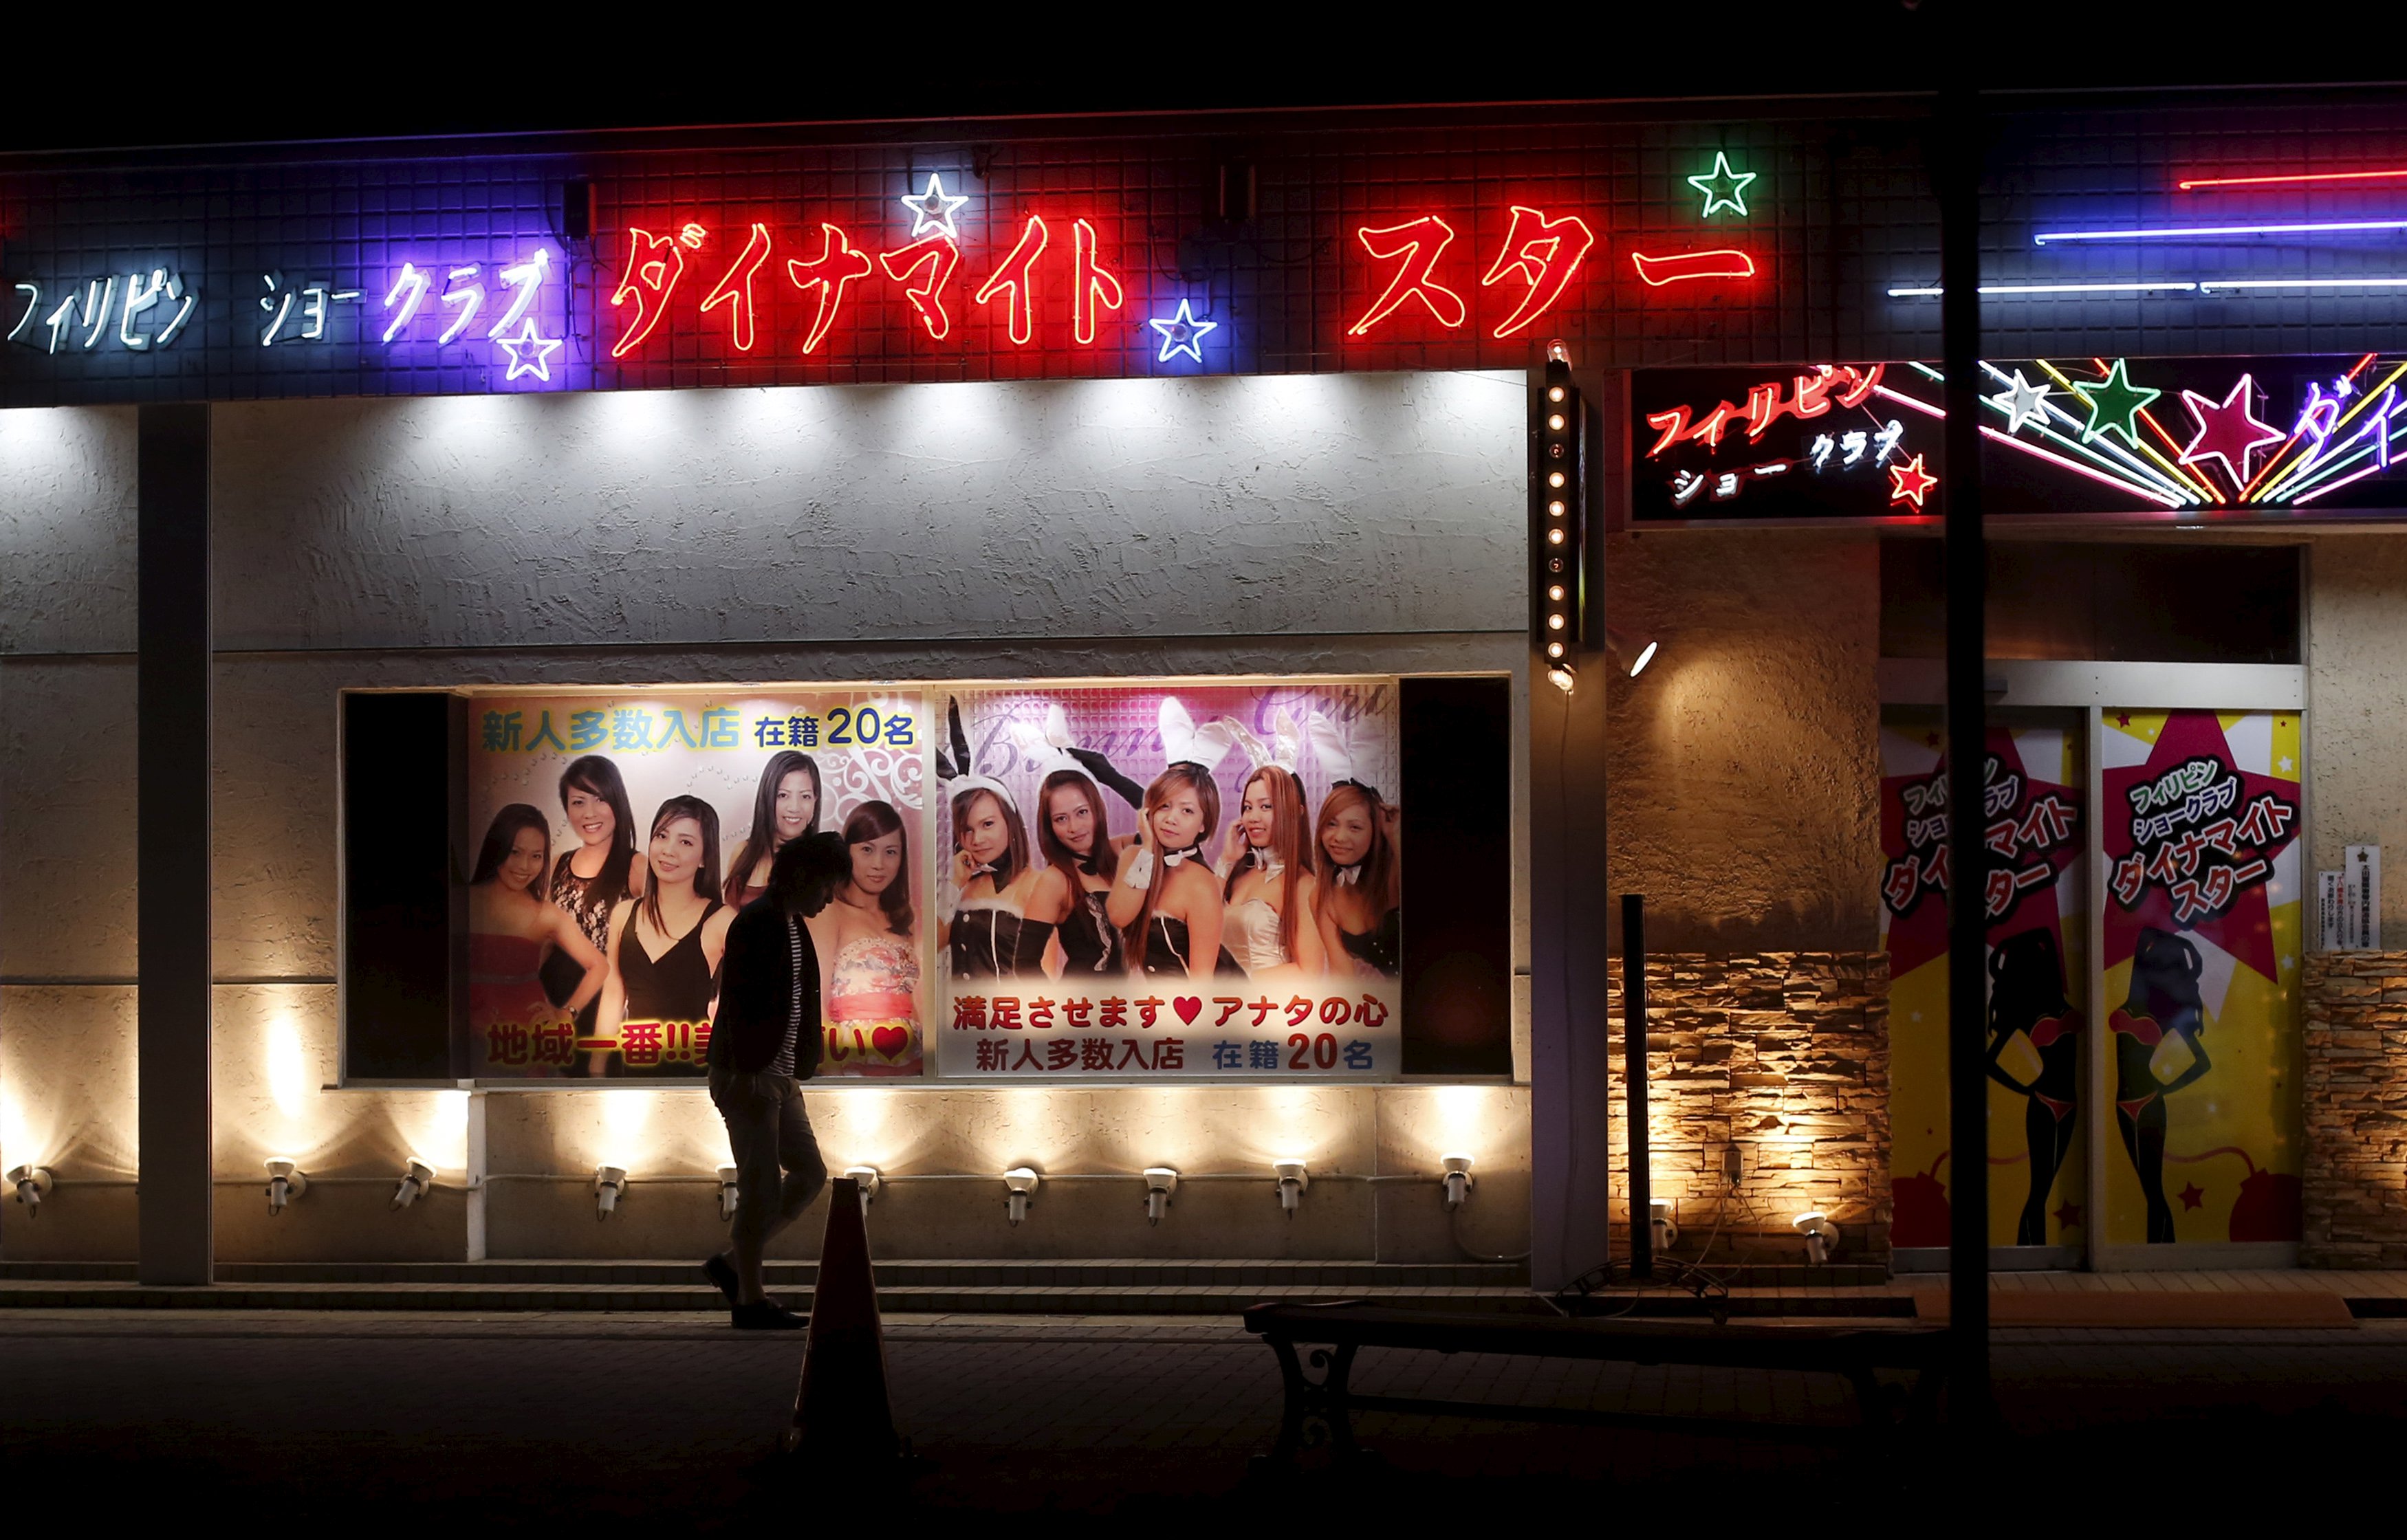 A man walks outside a club with an advertisement depicting women from the Philippines in the red light district in Ota, Gunma prefecture, north of Tokyo, Japan, April 24, 2015. Picture taken April 24, 2015. To match Special Report JAPAN-SUBARU/ REUTERS/Yuya Shino